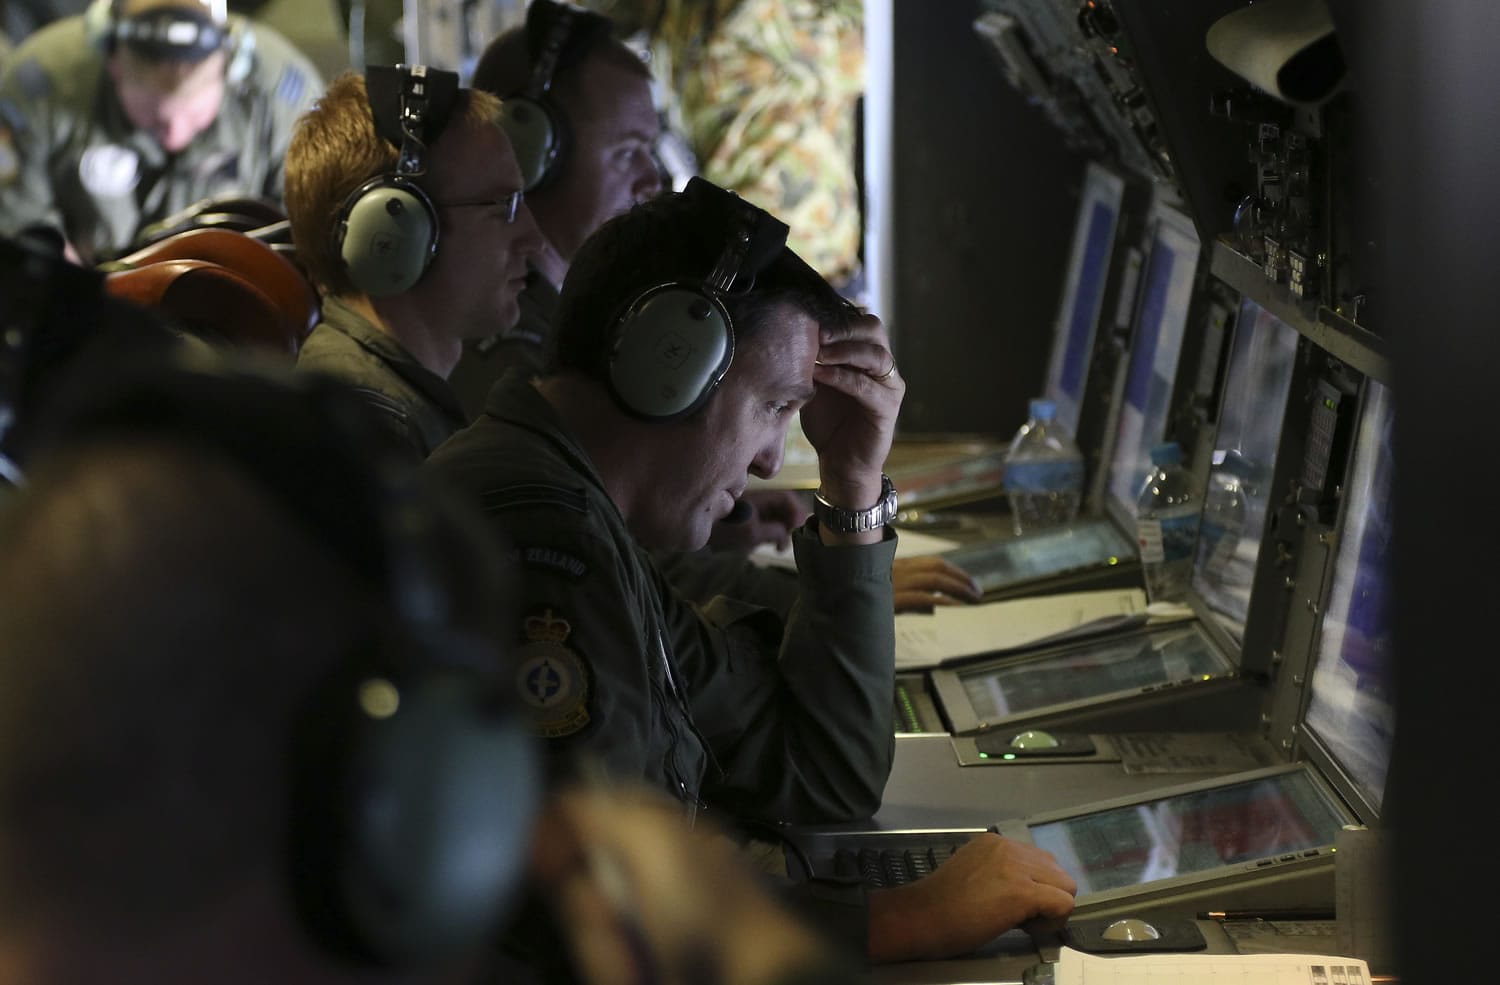 Operators monitor TAC stations onboard a Royal New Zealand Air Force P3 Orion on Friday during search operations for wreckage and debris of missing Malaysia Airlines Flight MH370 in the southern Indian Ocean, near the coast of Western Australia.